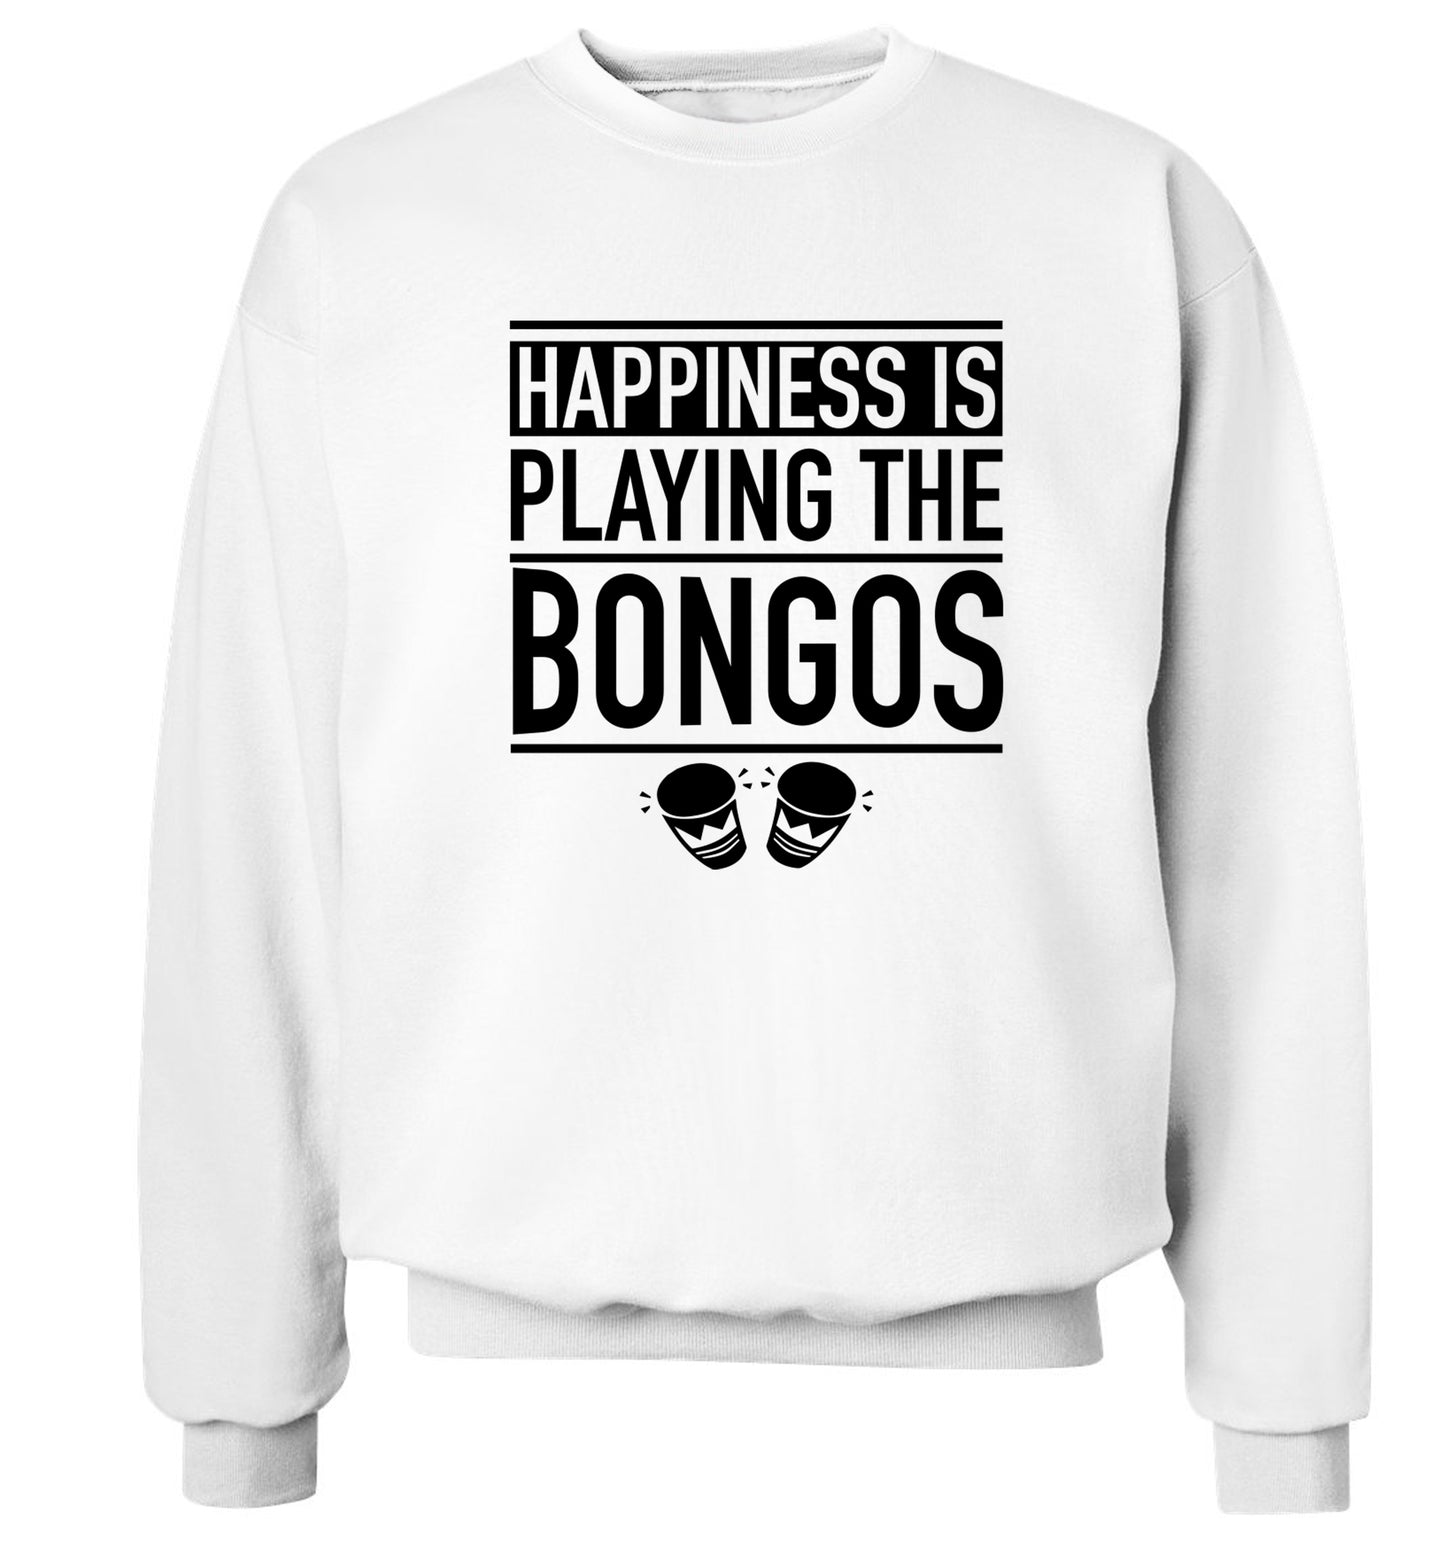 Happiness is playing the bongos Adult's unisex white Sweater 2XL